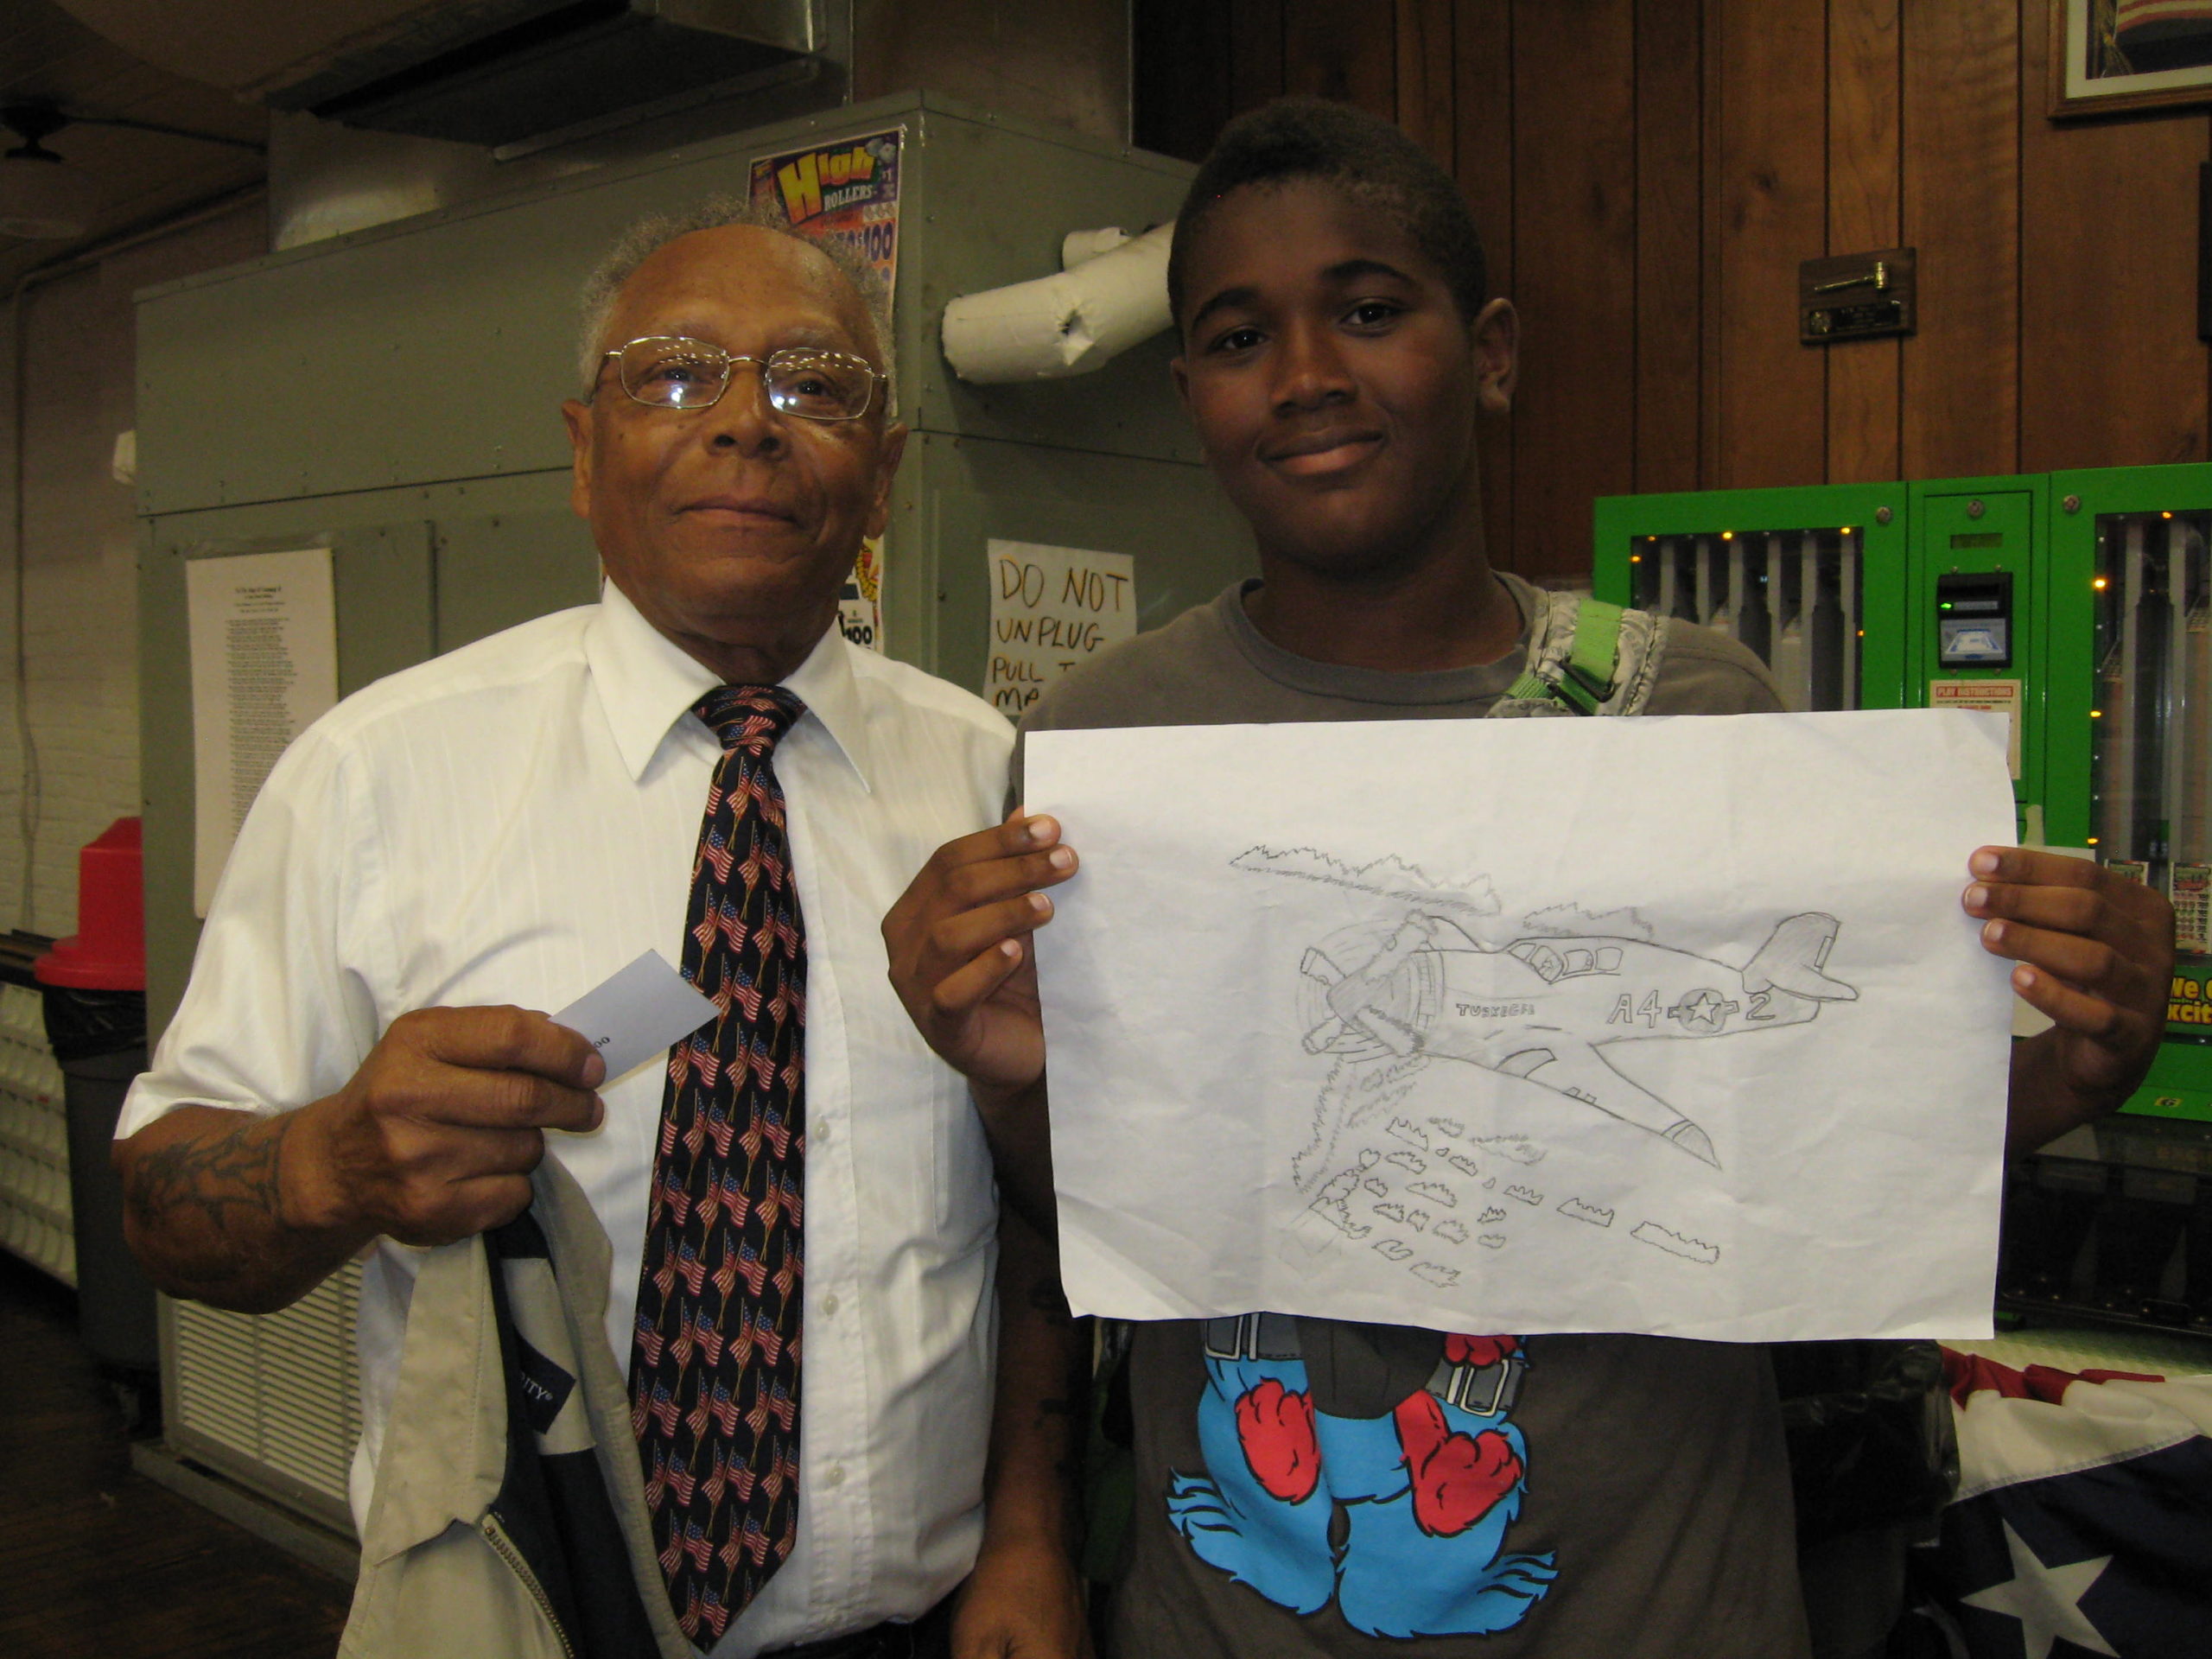 George Reed at Asbury Park Middle School